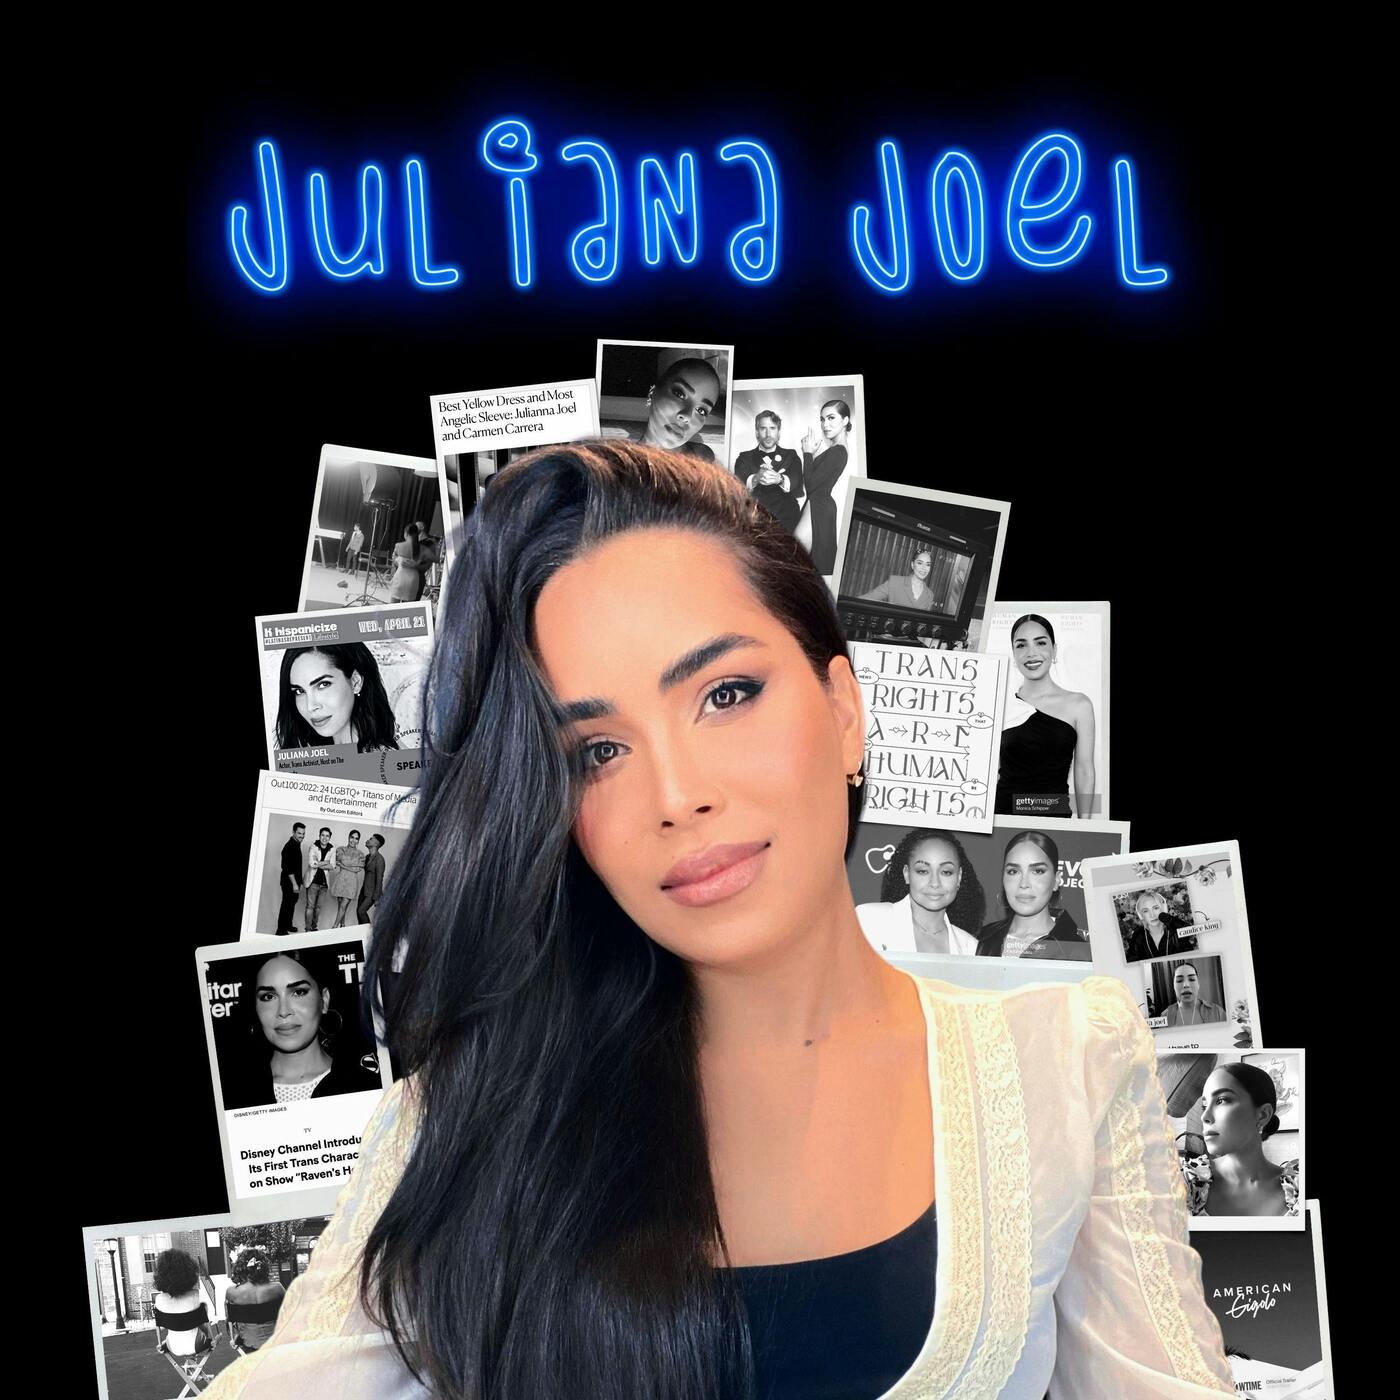 Vulnerable EP56: Juliana Joel on Making History as Disney’s First Openly Transgender Actress